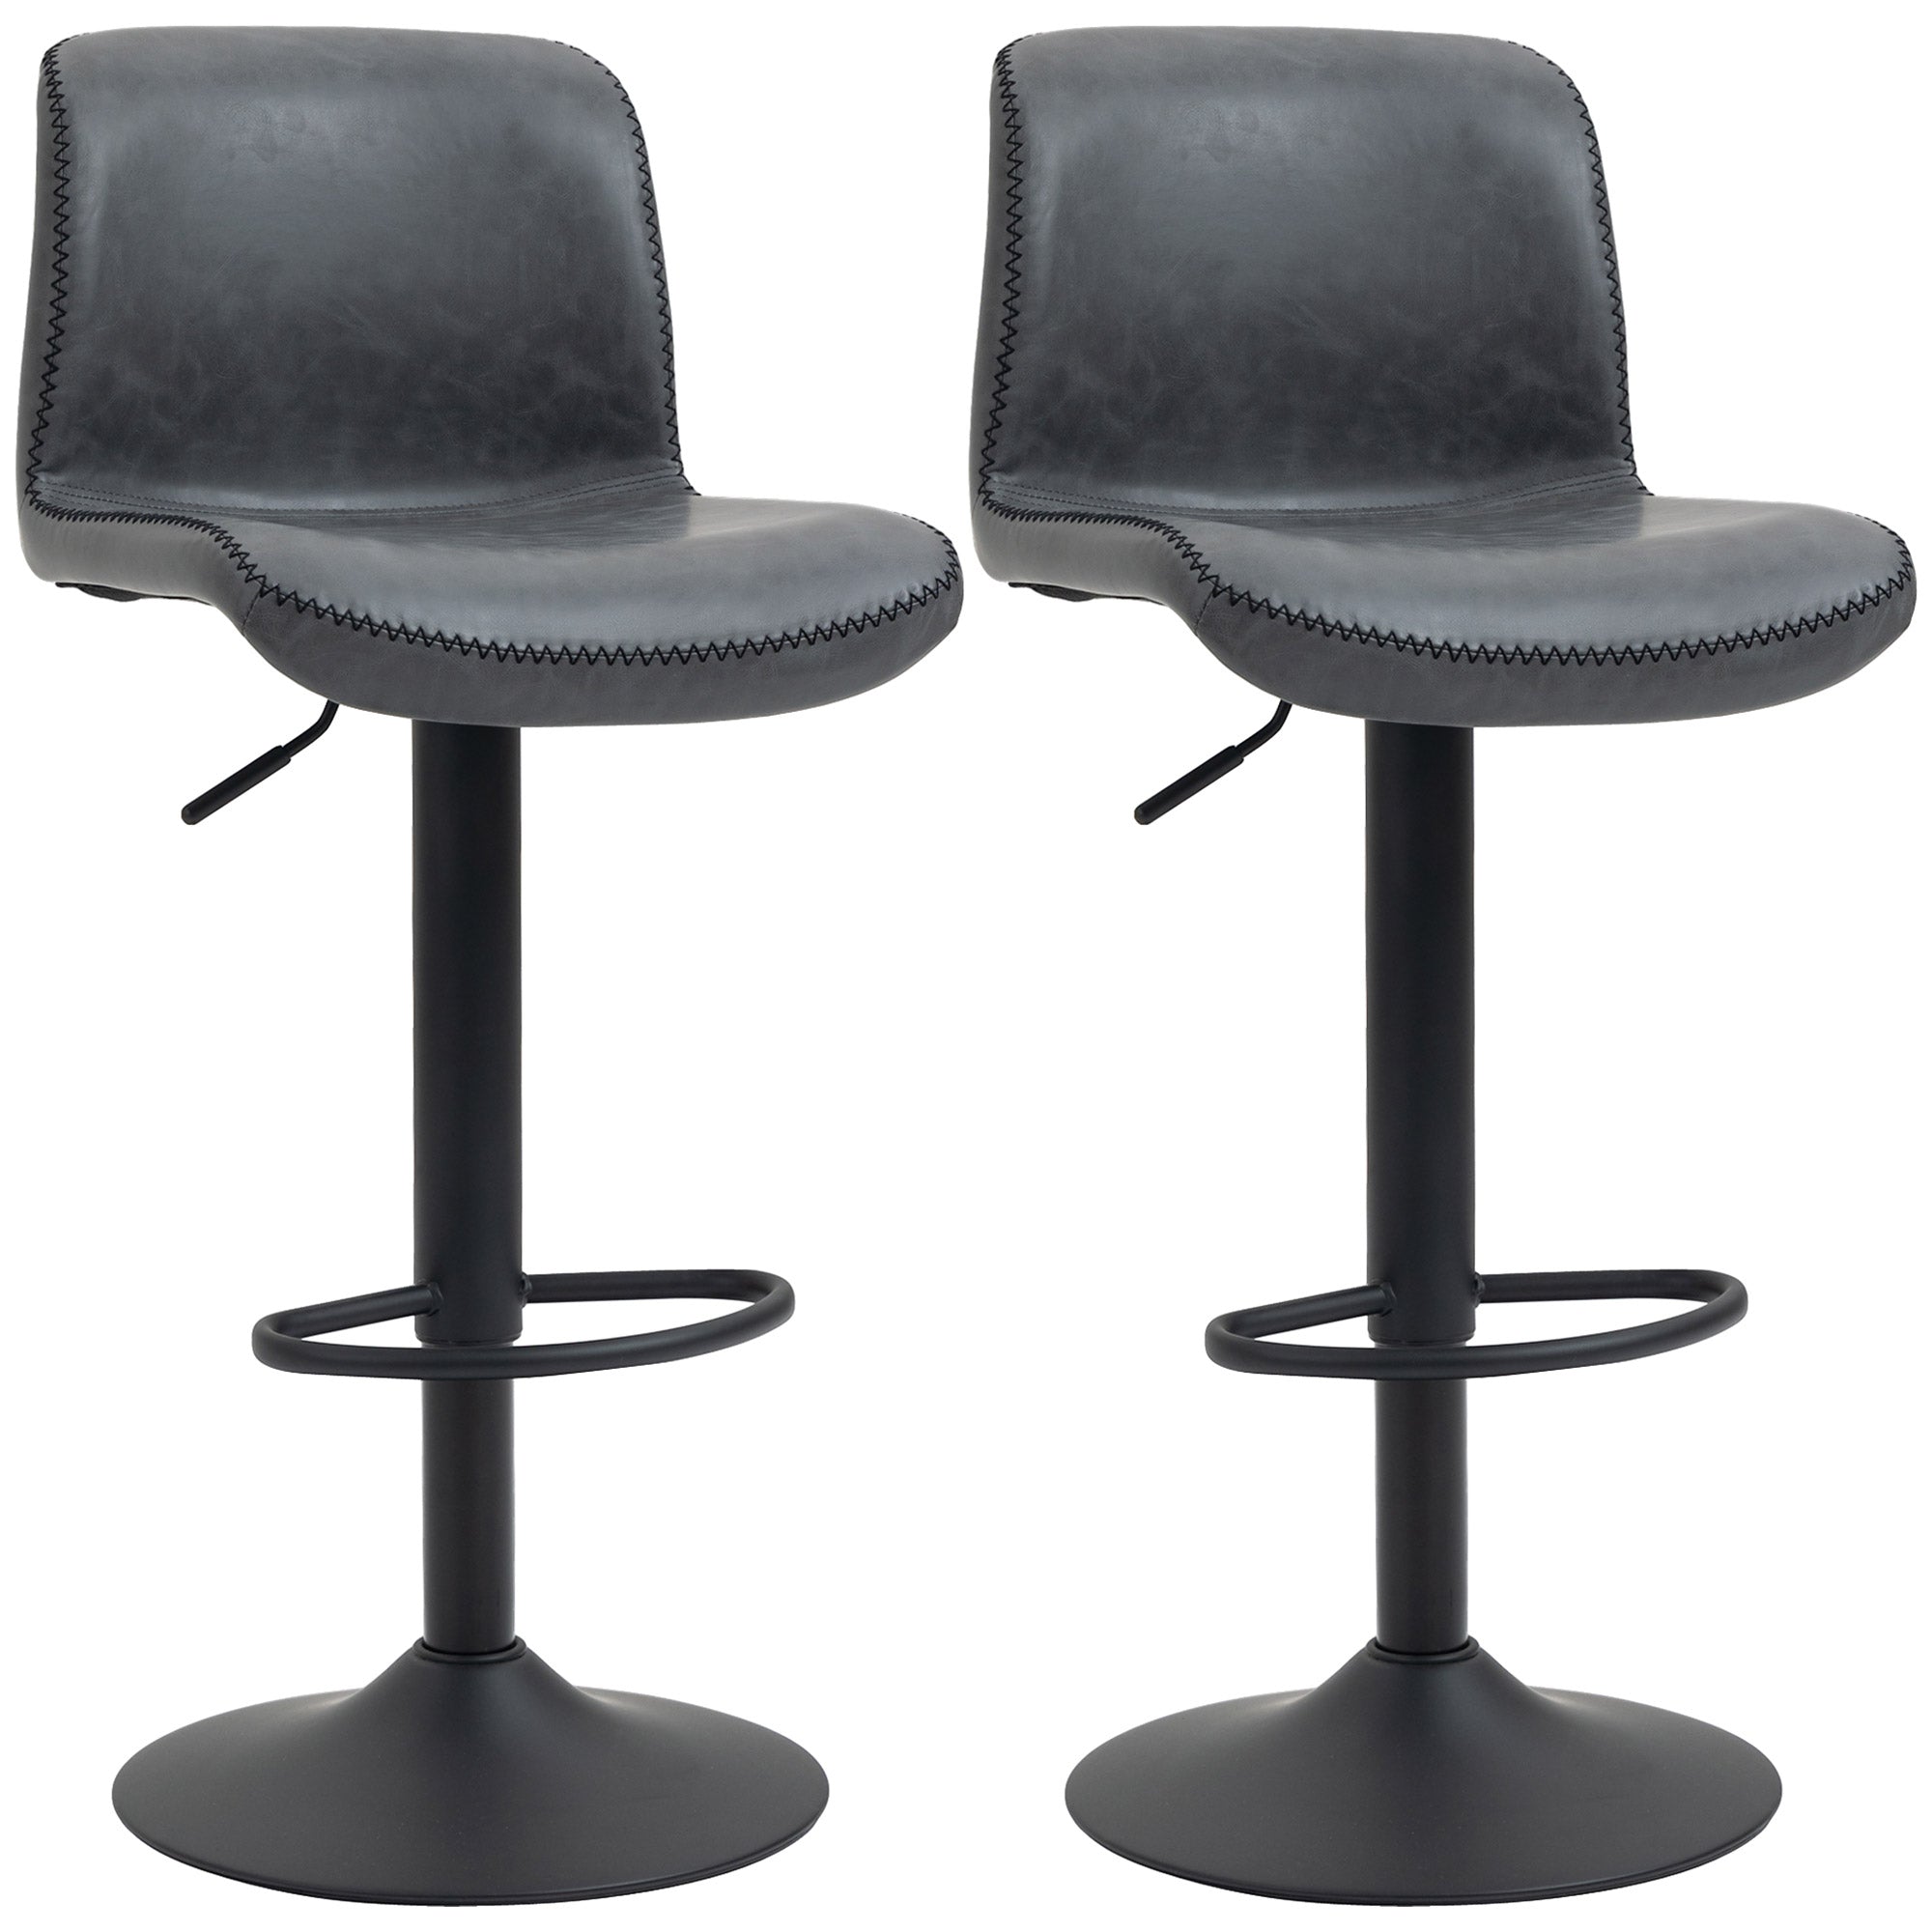 Set of 2 Bar Stool Adjustable Height Swivel Footrest and Base for Breakfast Bar, Kitchen and Home, Dark Grey  AOSOM   